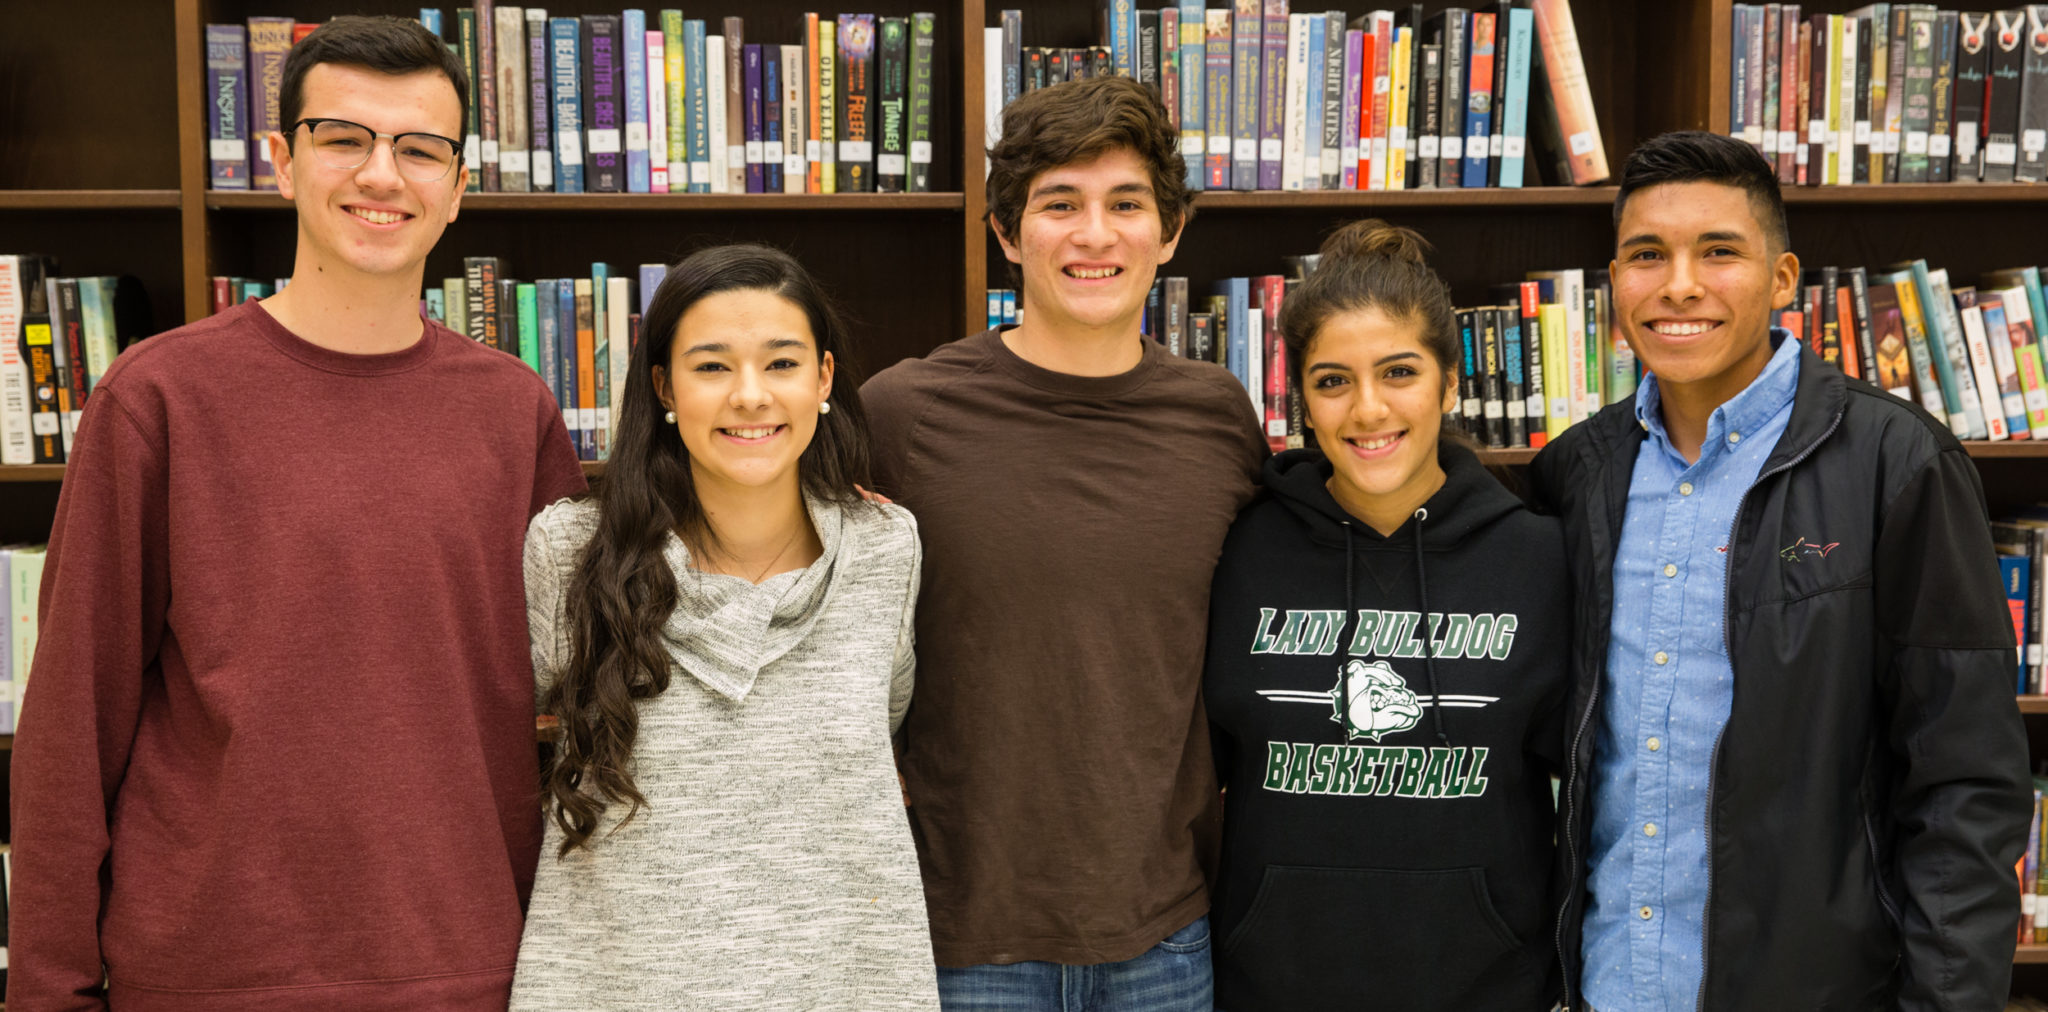 Travis, Gabriela, Chase, Adriana, and Marcos are currently seniors at Lyford High School.